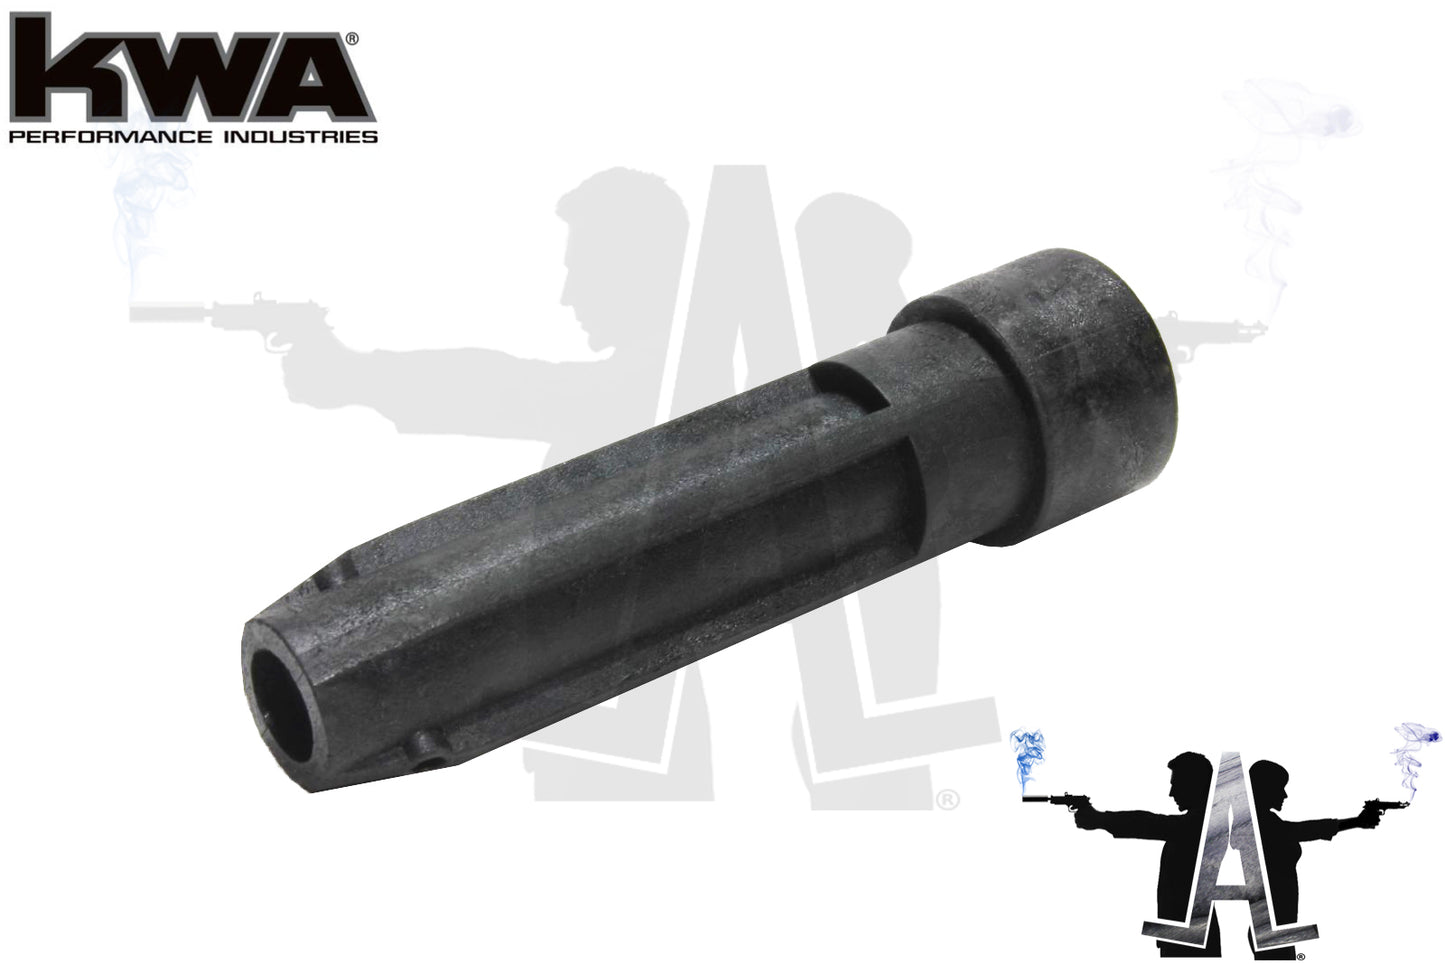 KWA Reinforced Poly-Carbon Buffer Recoil Unit